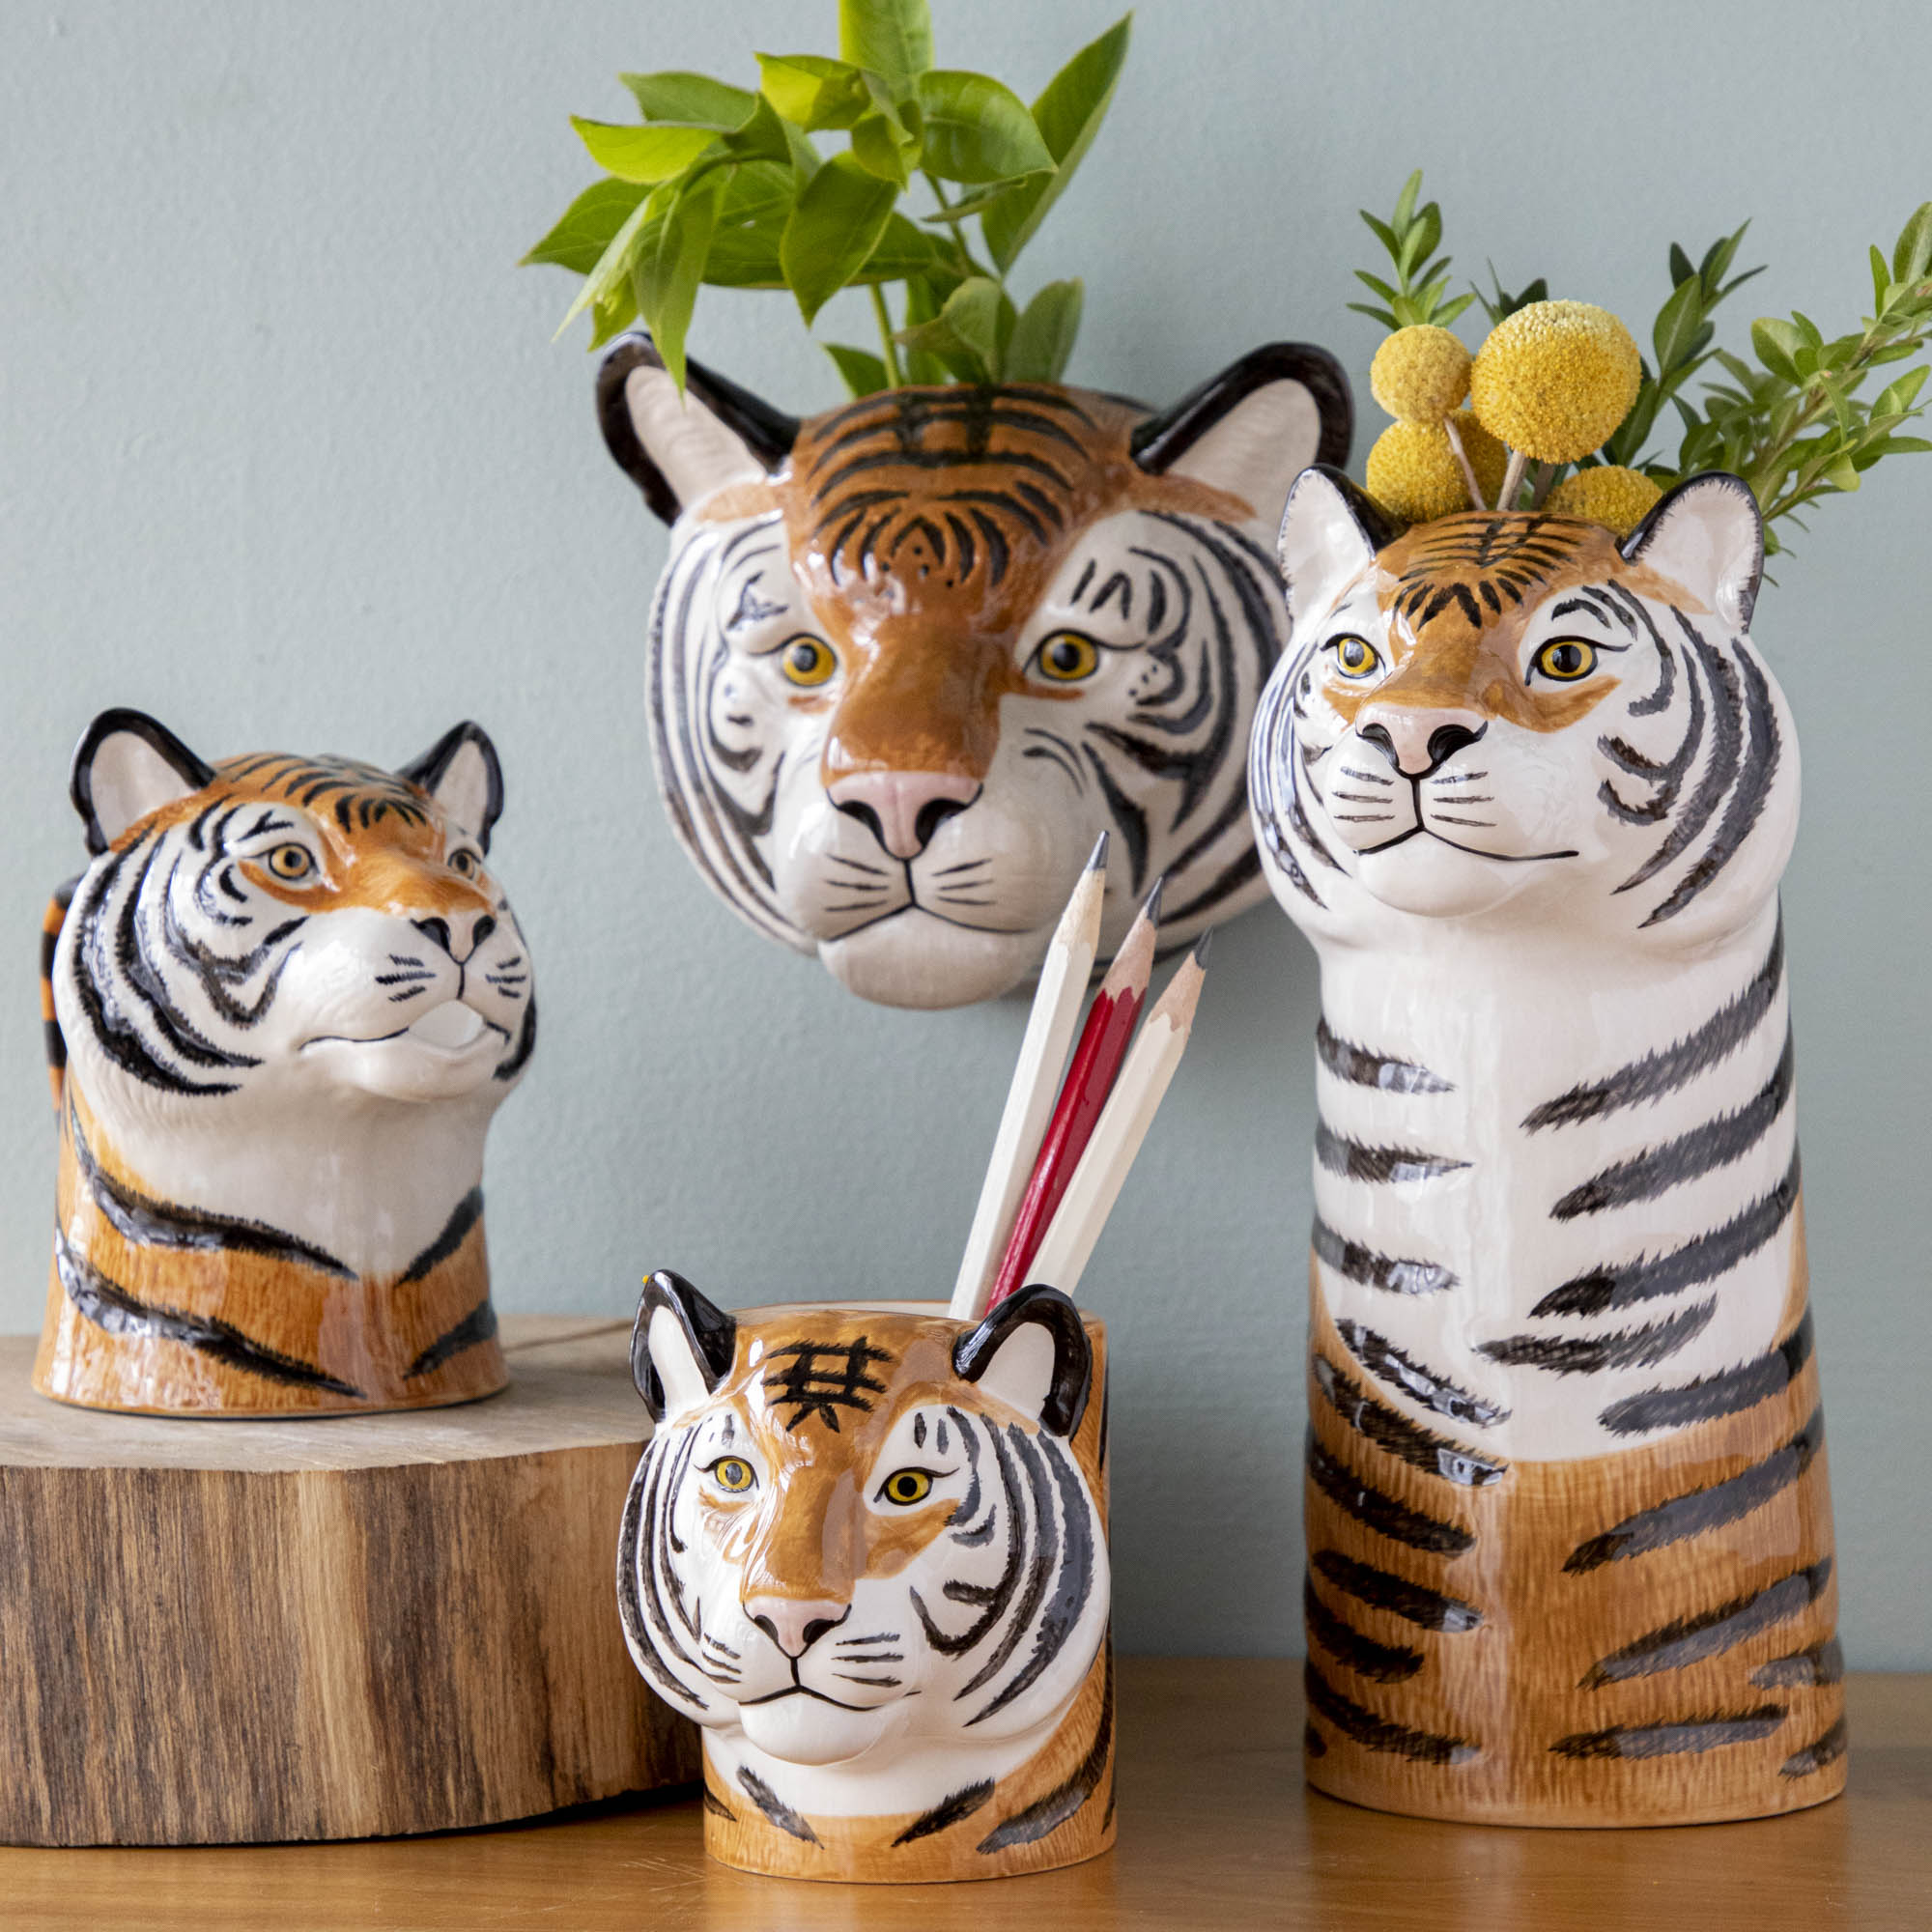 A set of Tiger Ceramic vases by Quail, displayed on a table.